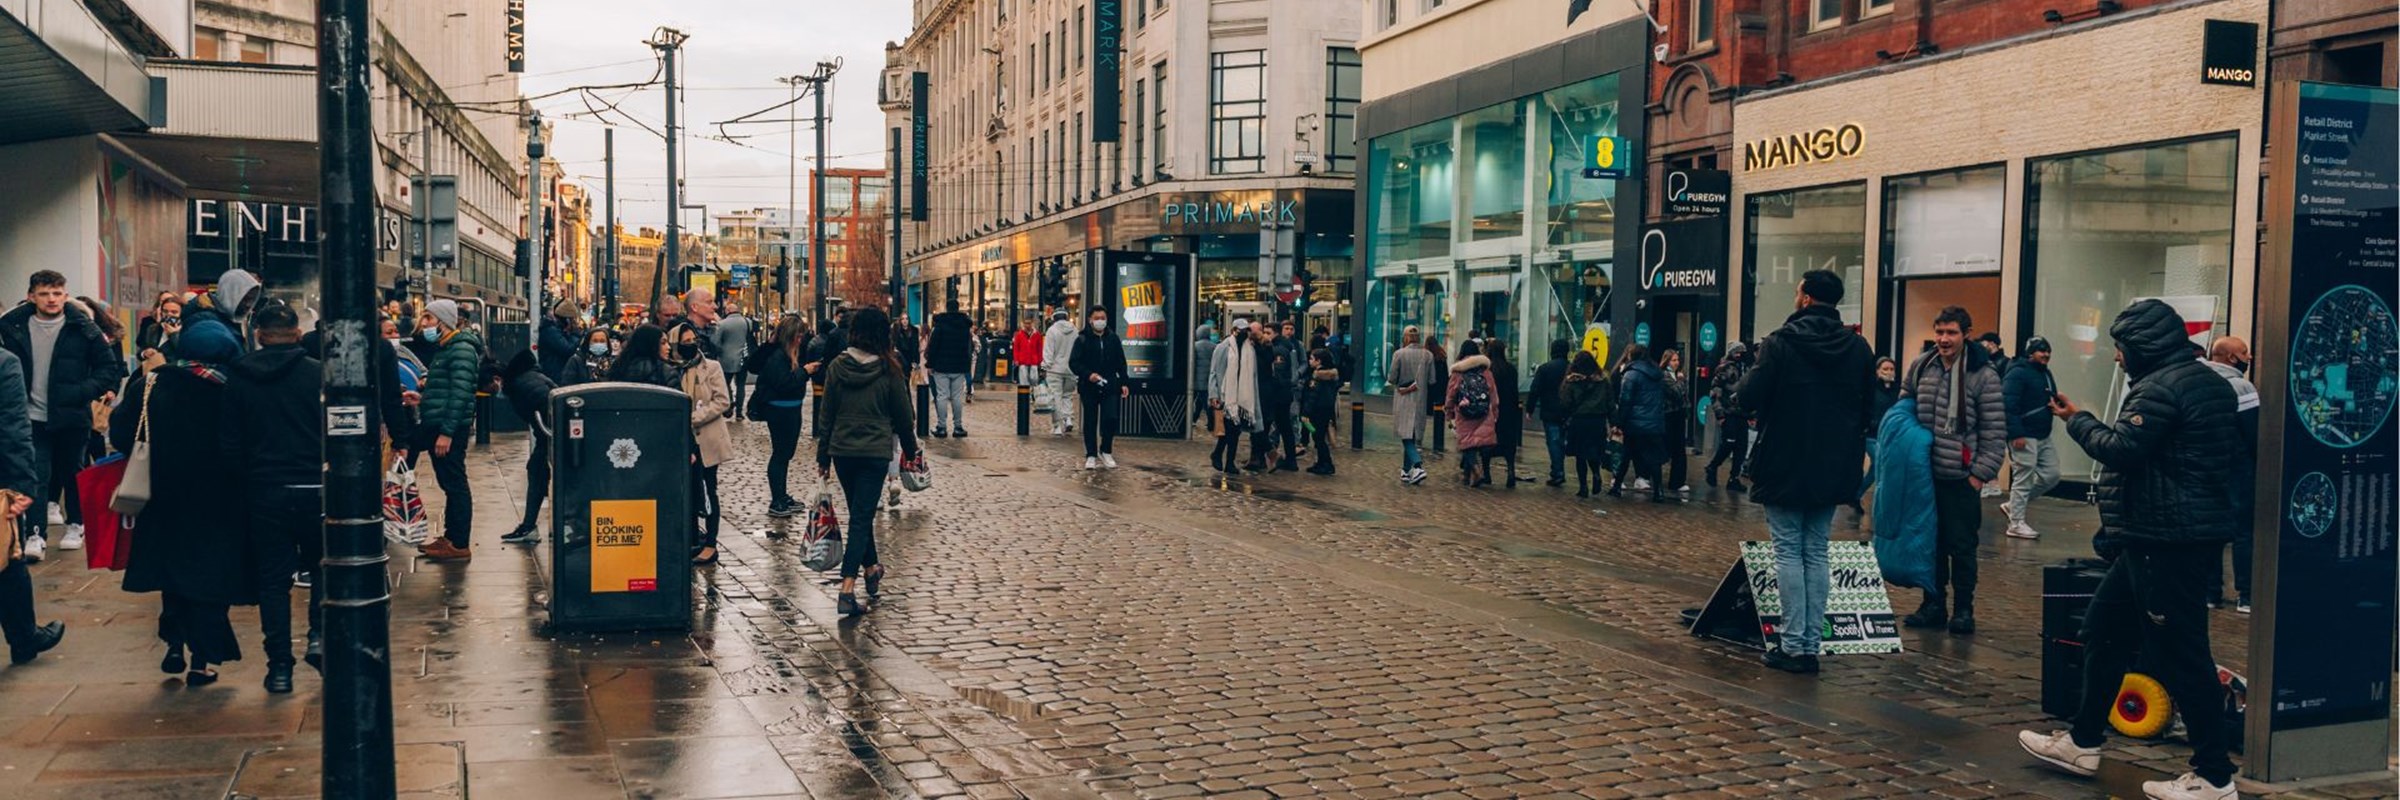 A busy city street  in Manchester with people walking and standing on the pavement